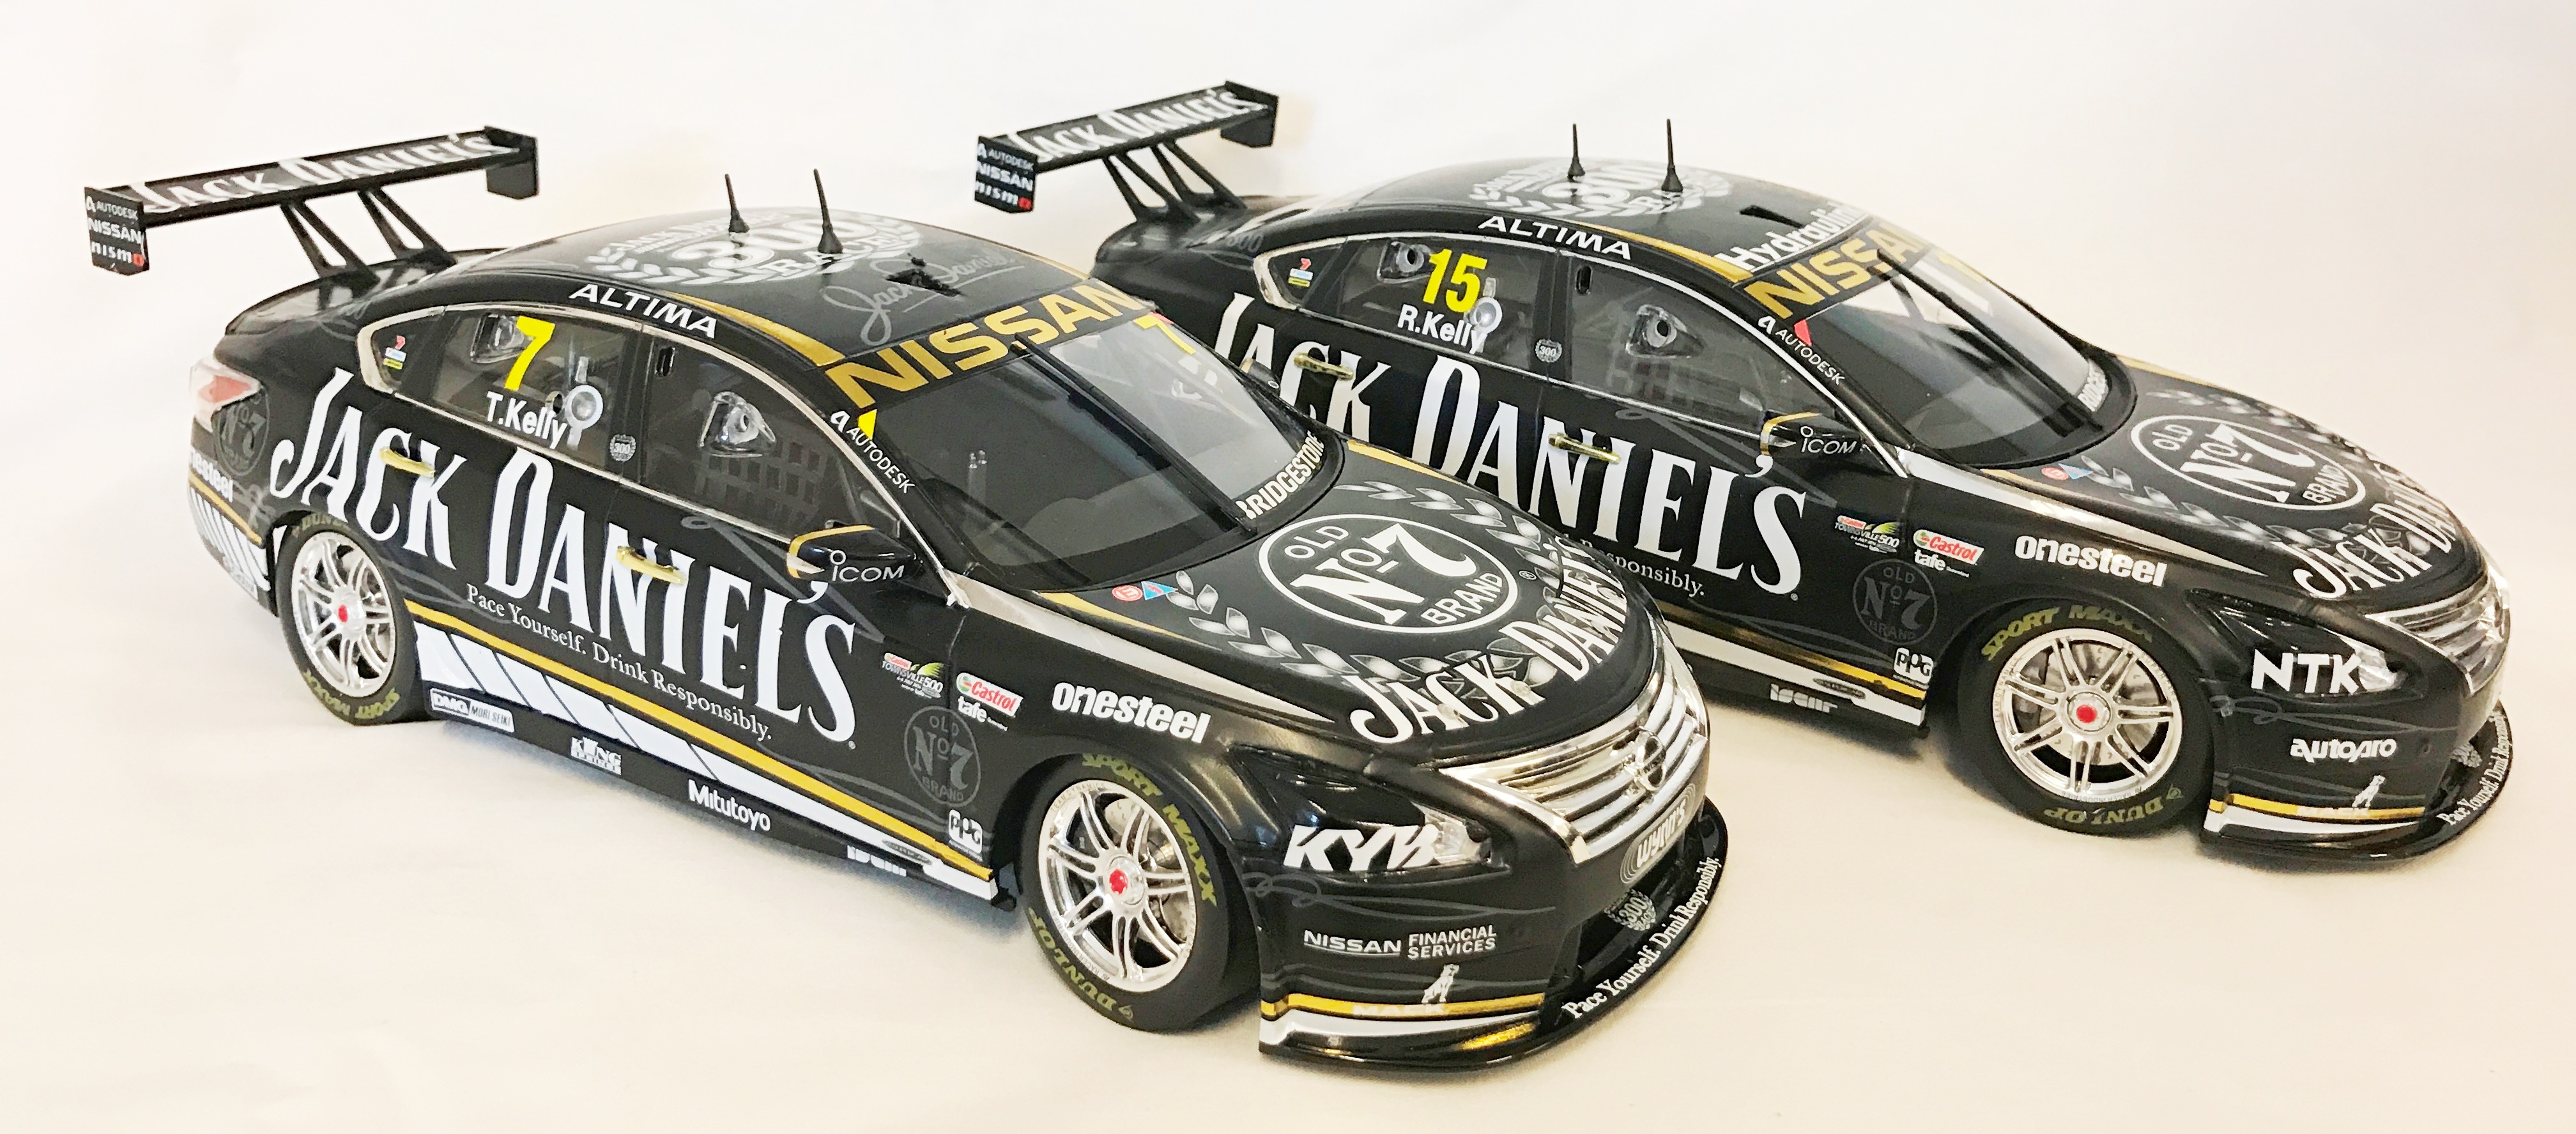 Nissan Altima Townsville Jack Daniel's Livery Todd Kelly #7 and Rick Kelly #15